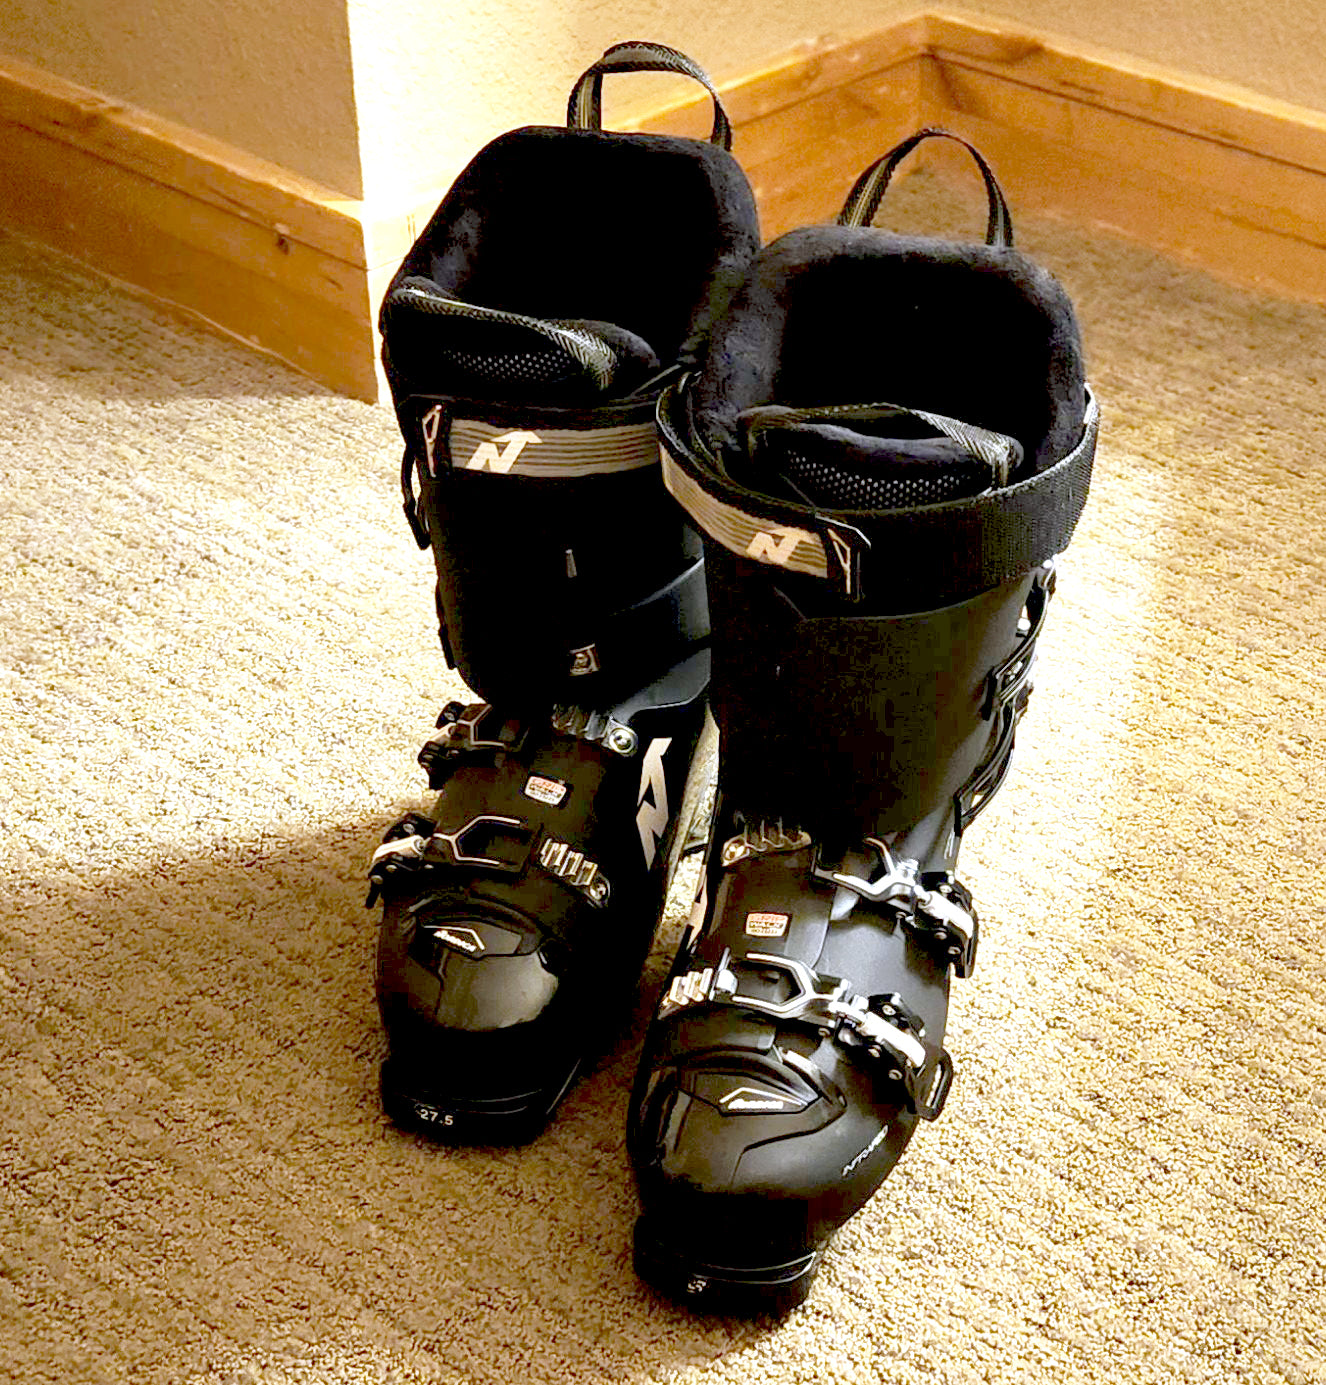 5 Reasons Why Choosing the Right Ski Boots is Essential for a Perfect Day on the Slopes